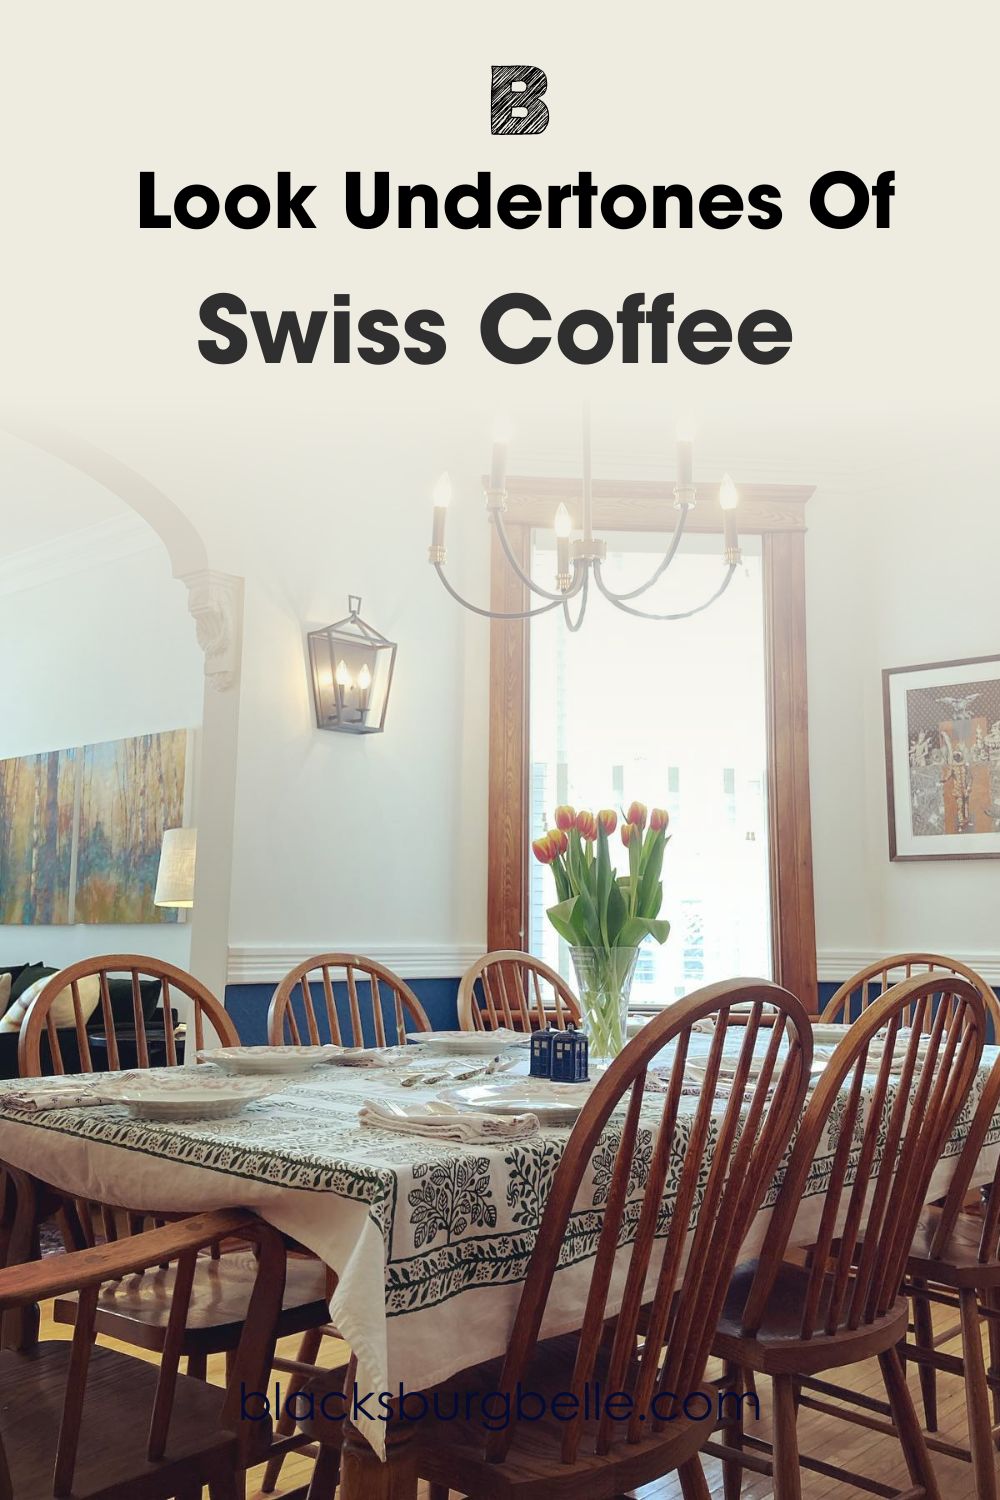 A Closer Look at the Undertones of Swiss Coffee